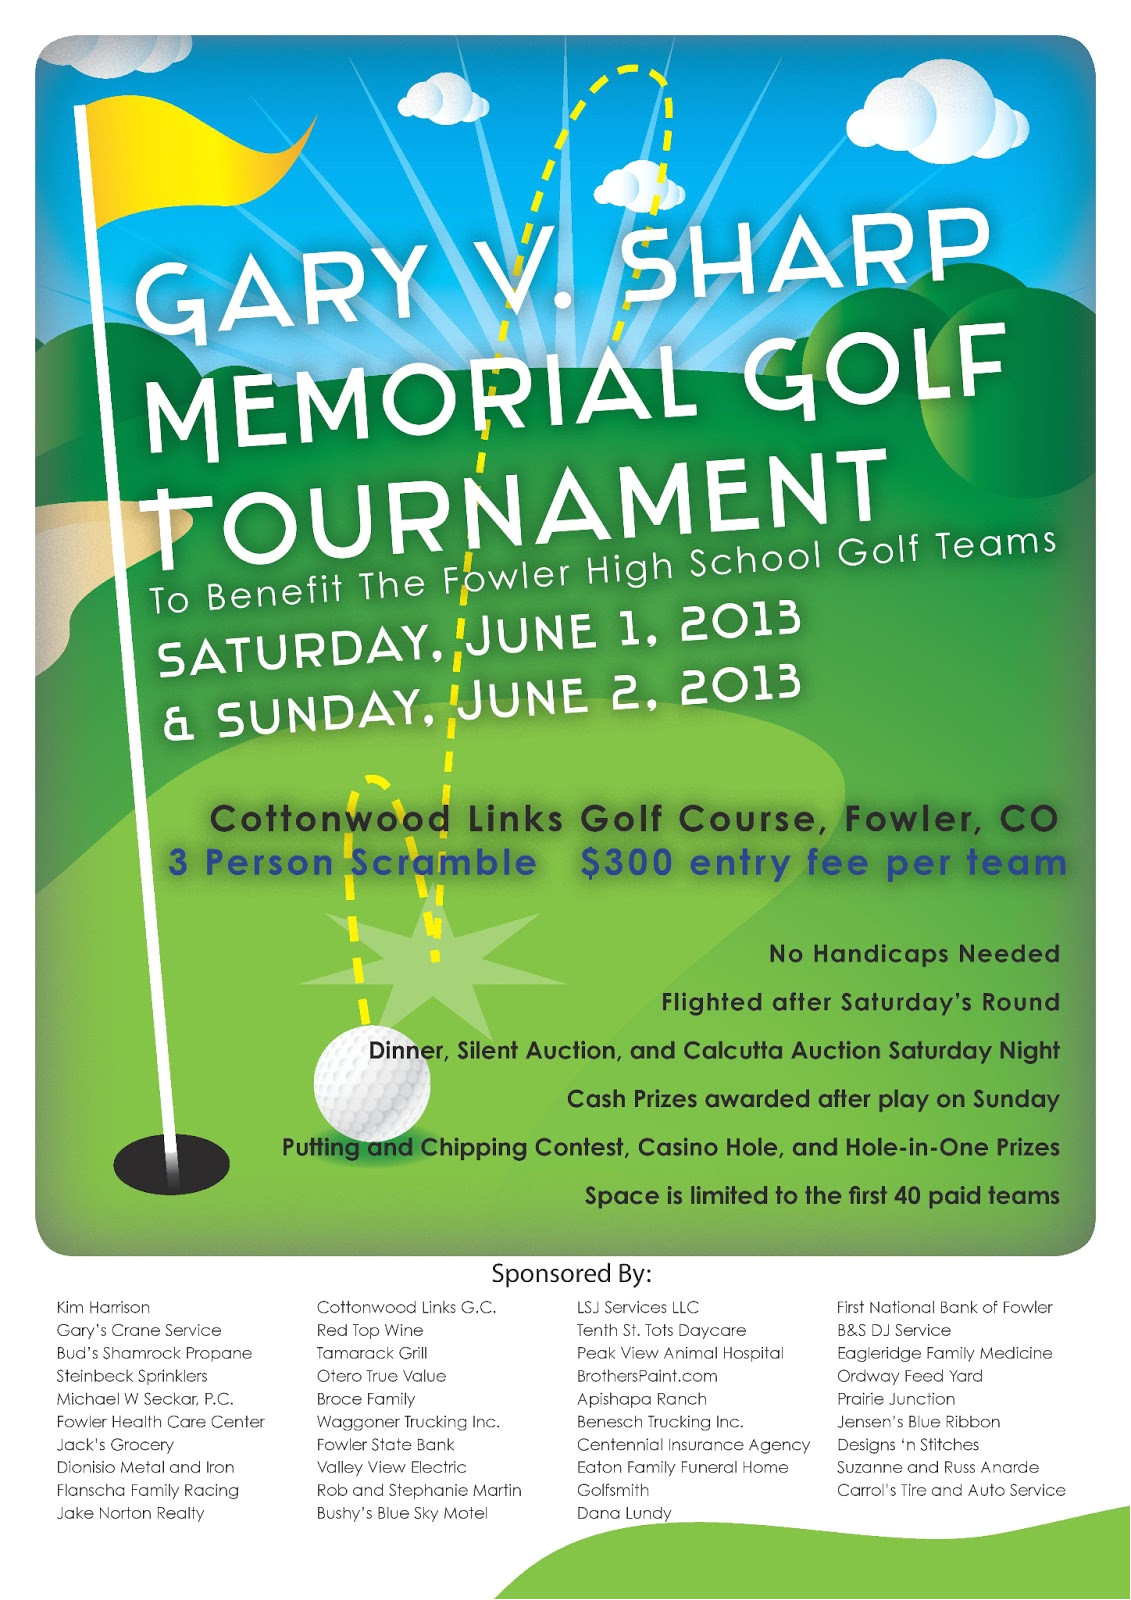 tournament flyer created by dana lundy